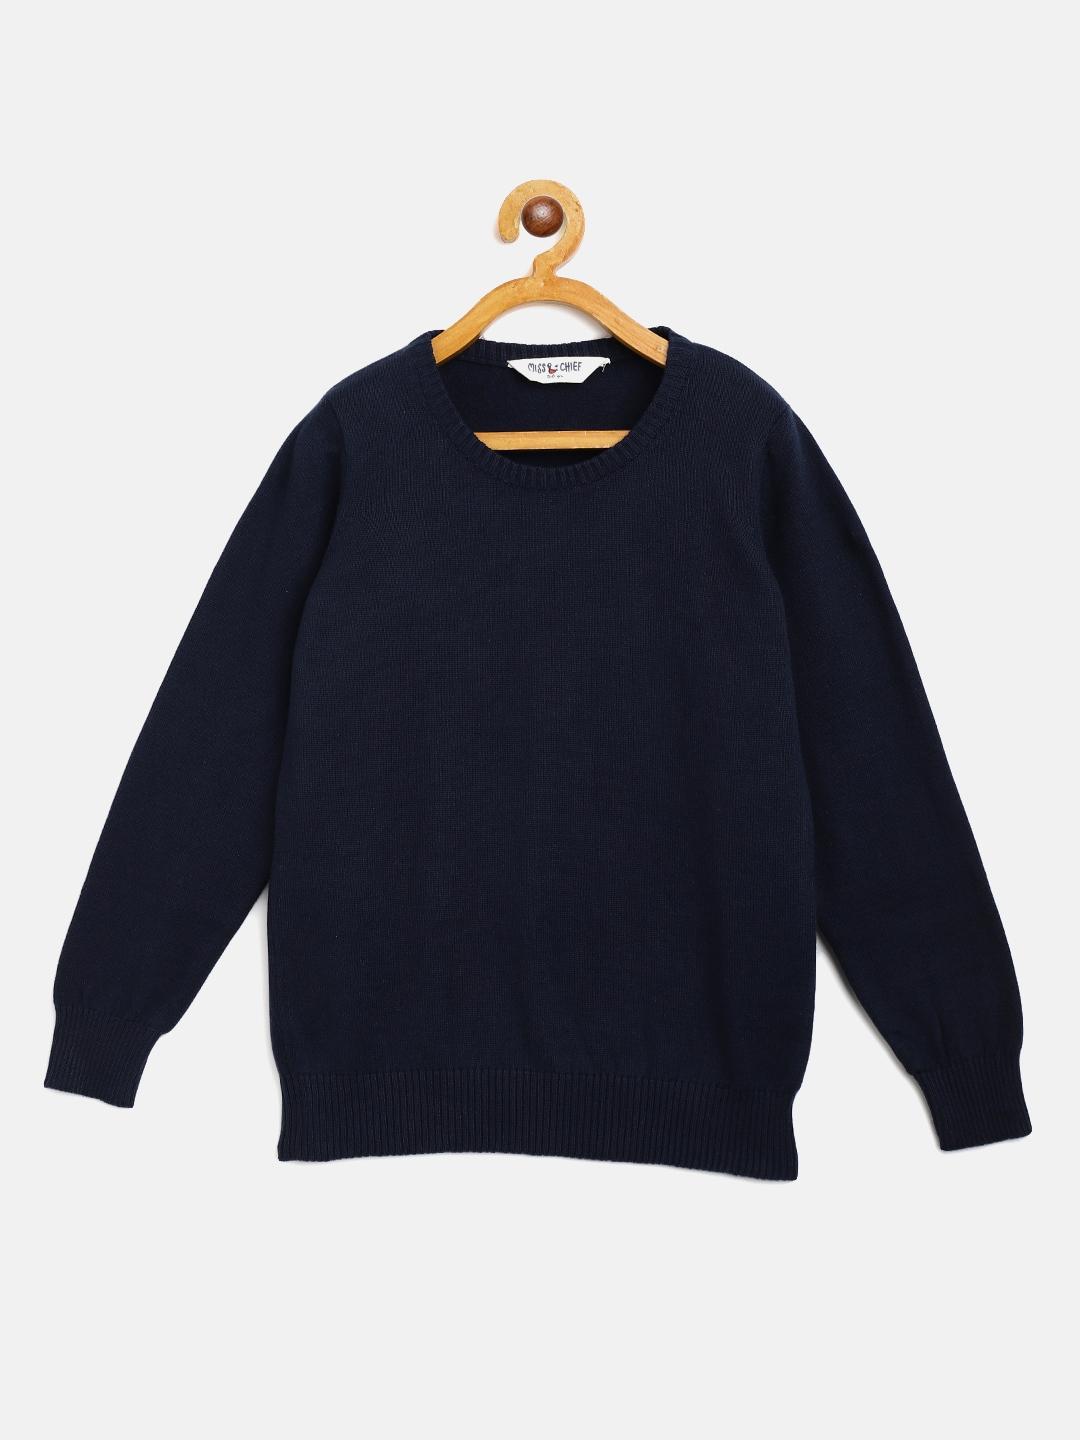 miss & chief boys navy blue pure cotton solid pullover